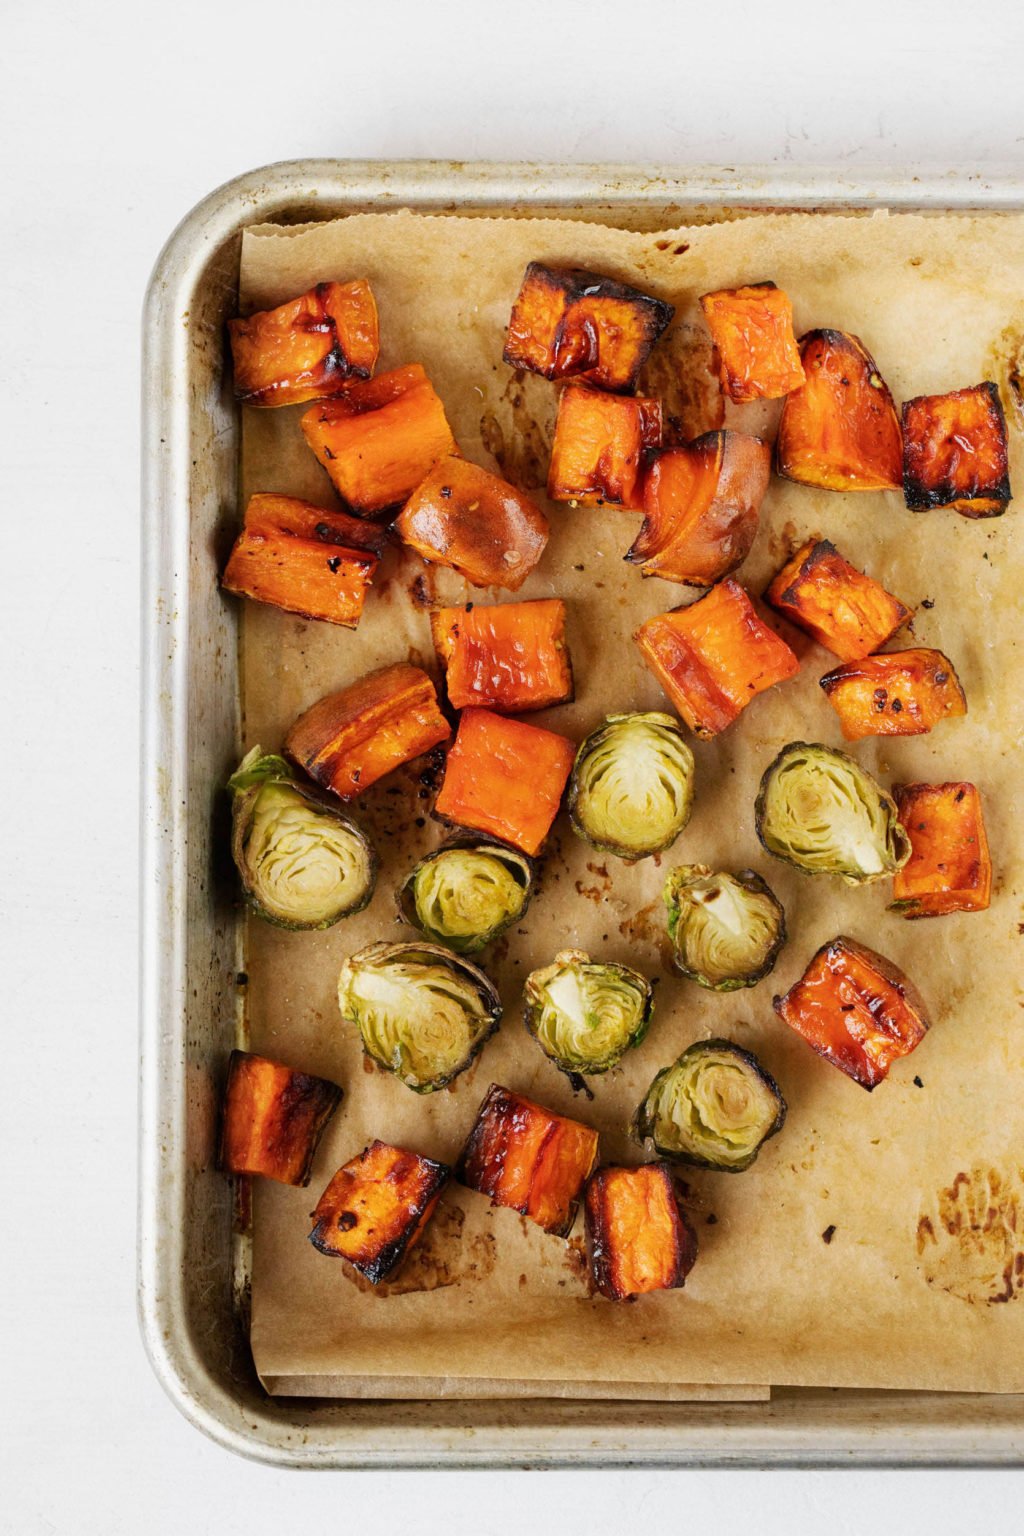 A baking sheet is covered in a layer of parchment, along with roasted sweet potatoes and Brussels sprouts.